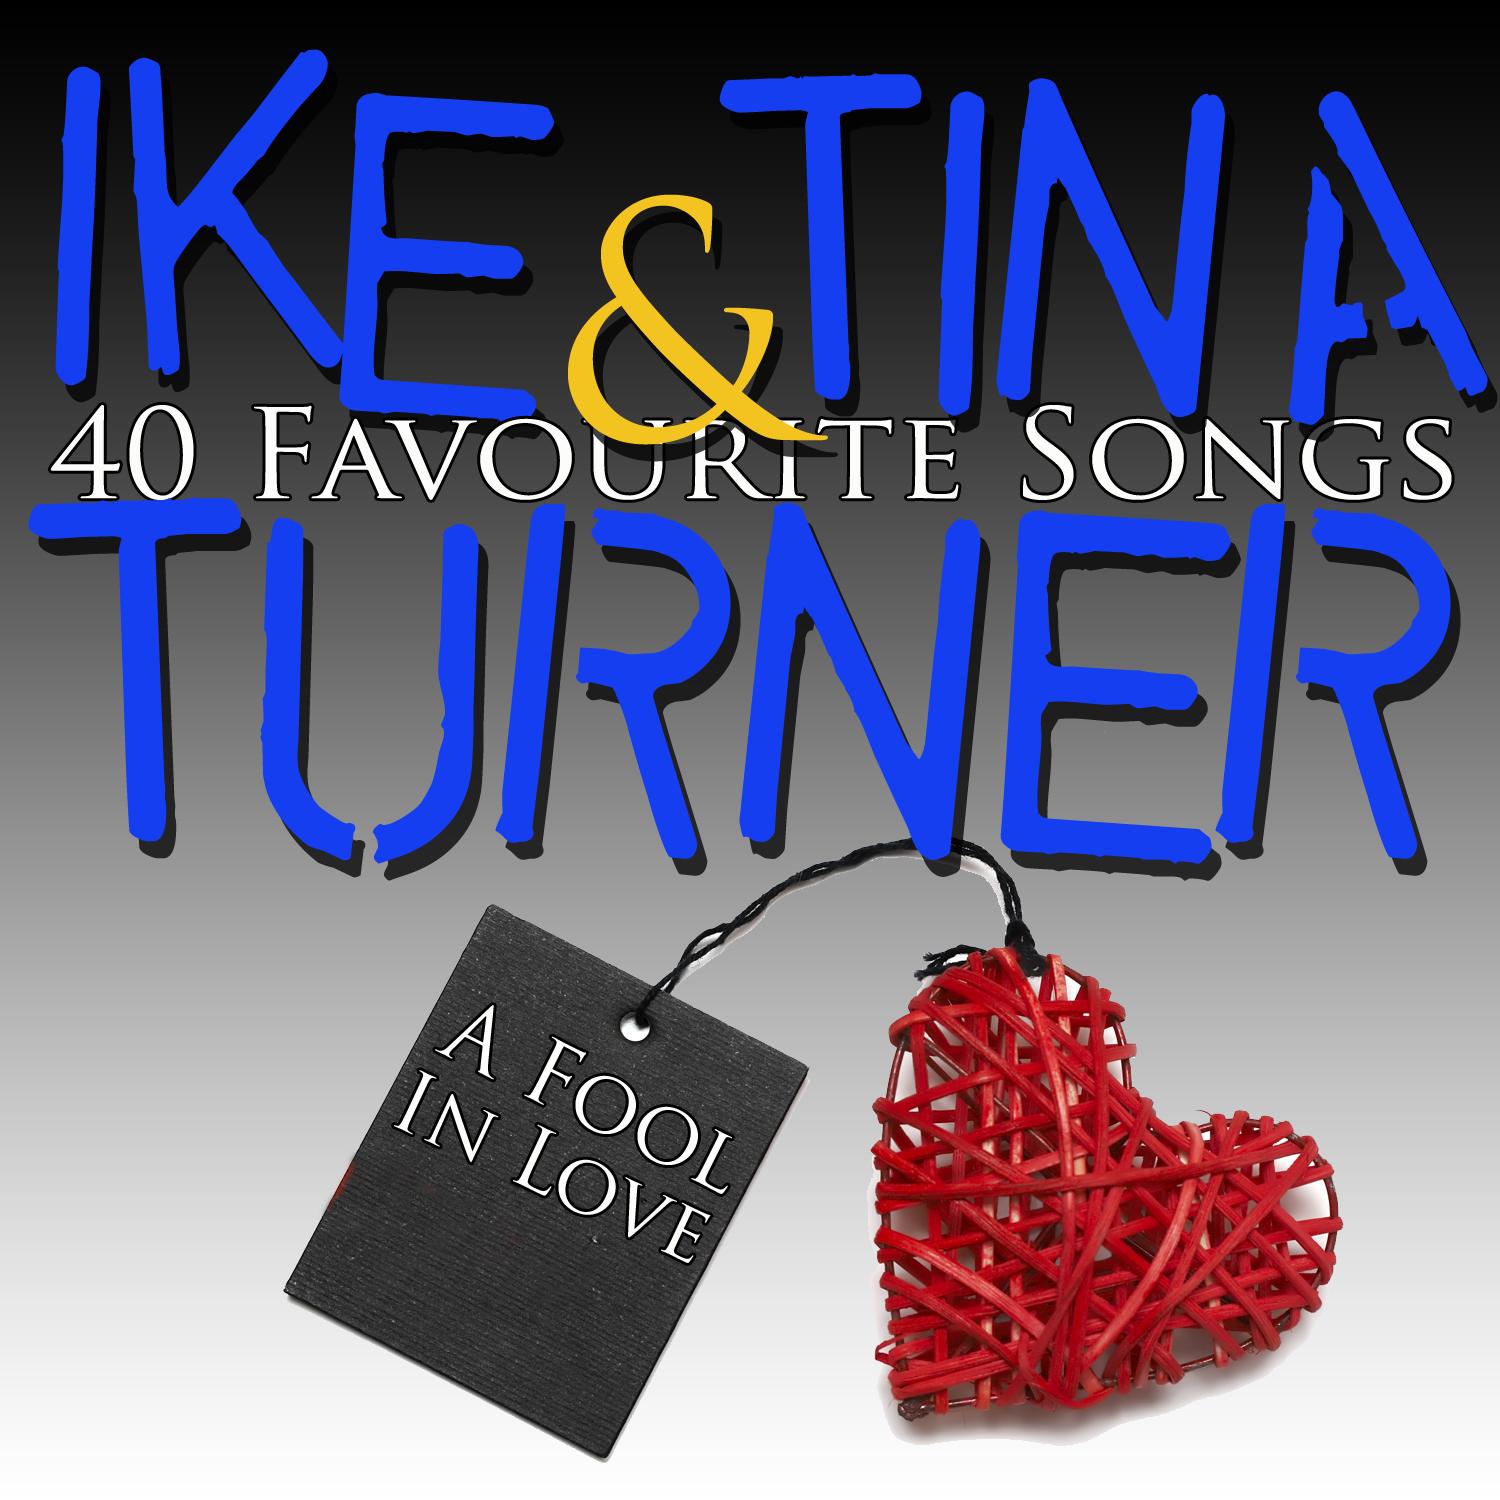 A Fool In Love - 40 Favourite Songs